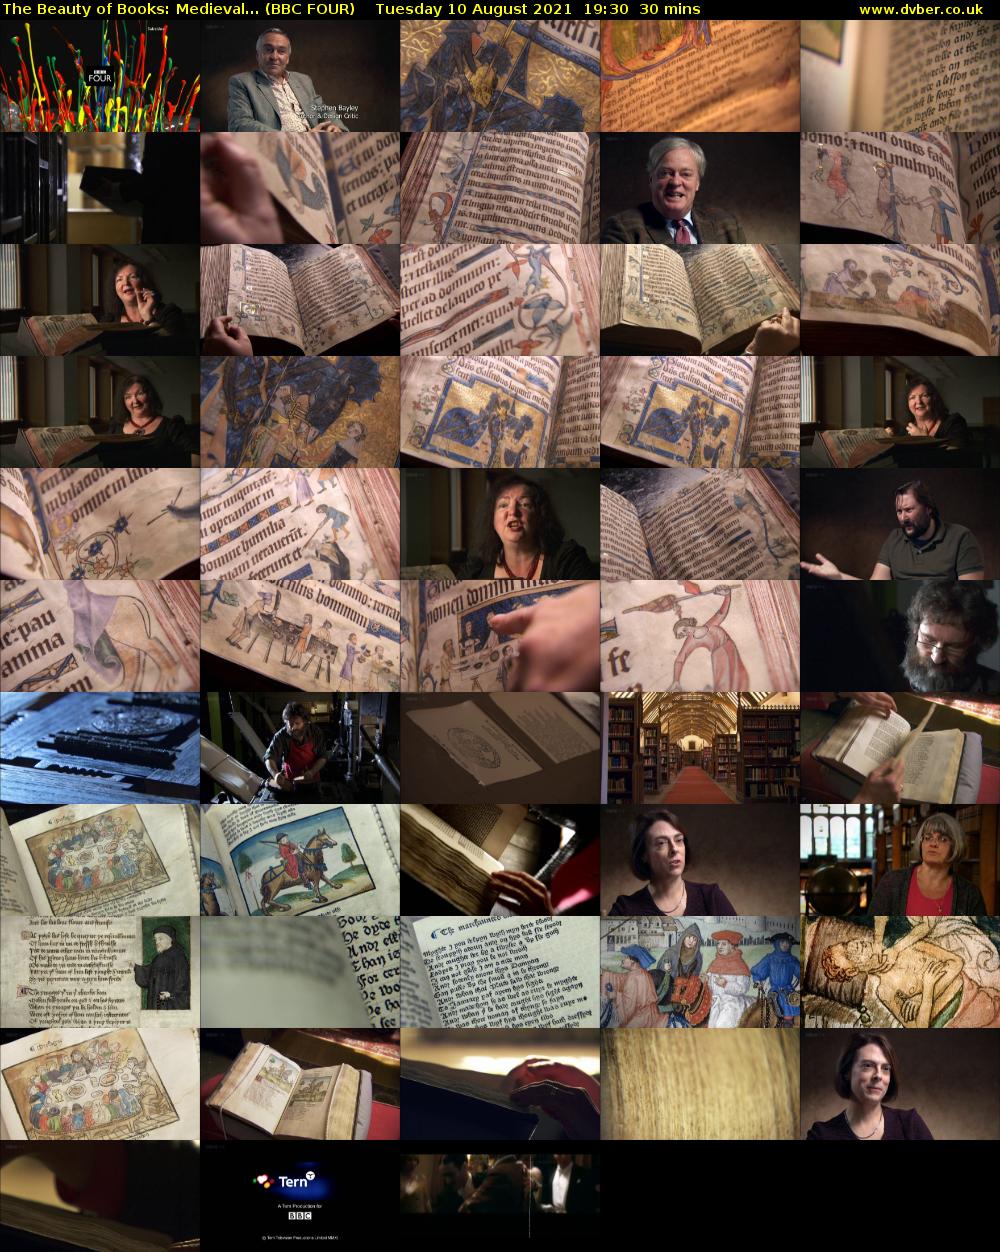 The Beauty of Books: Medieval... (BBC FOUR) Tuesday 10 August 2021 19:30 - 20:00